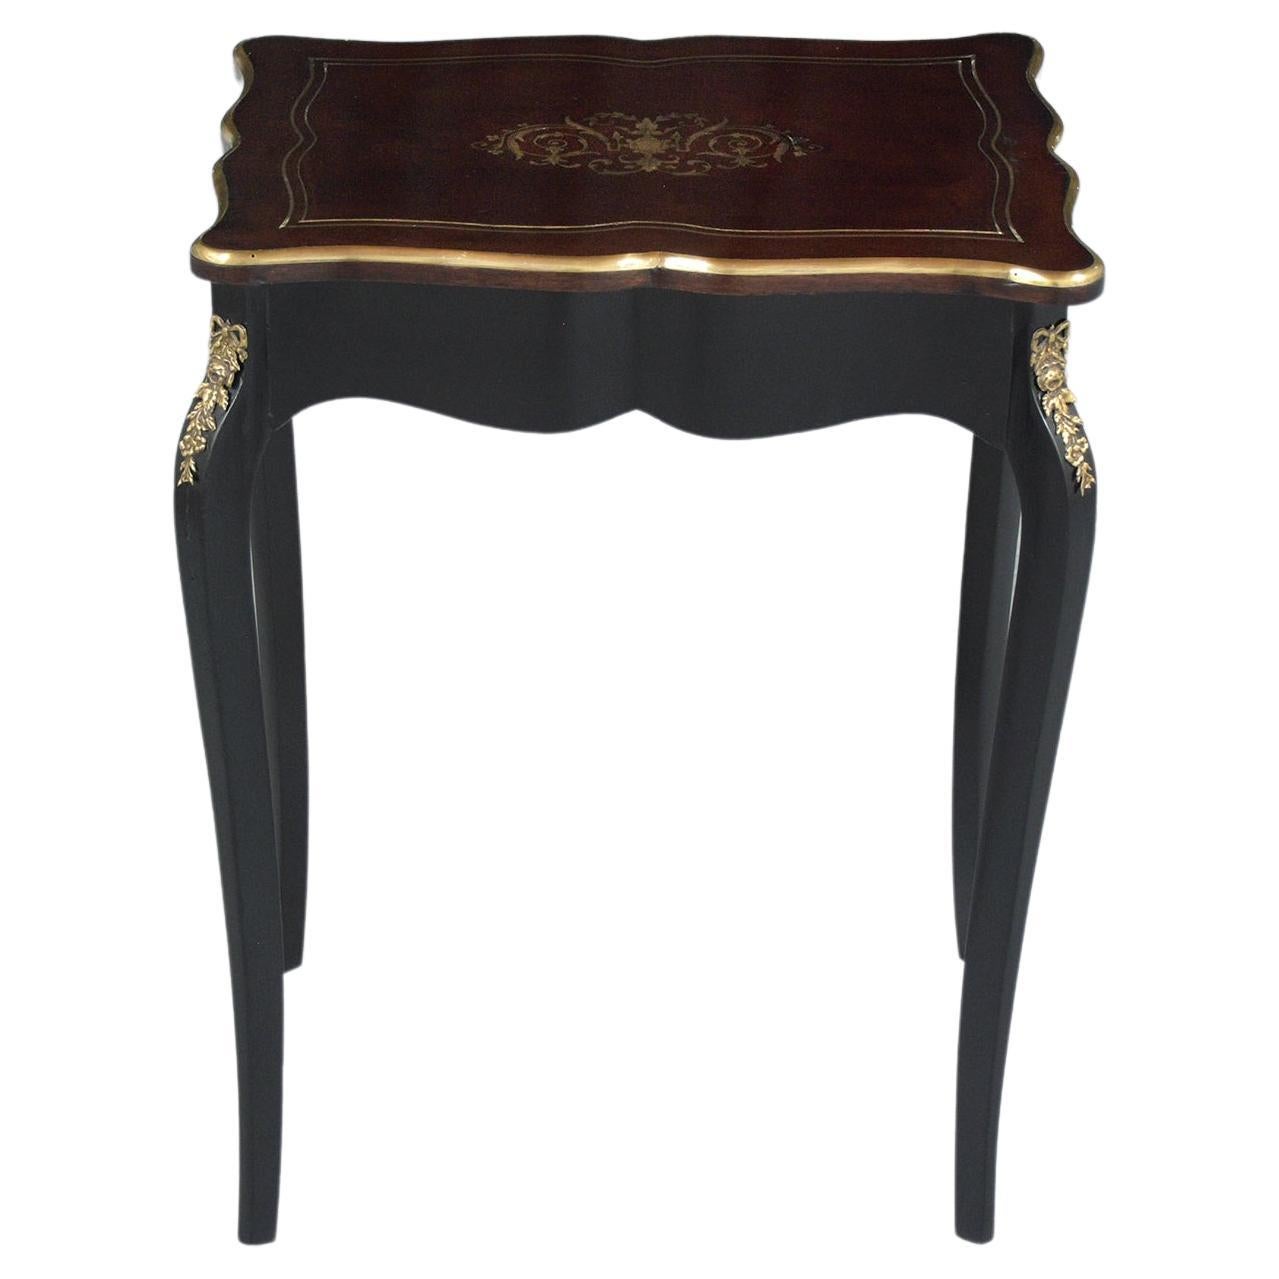 Elegant French Napoleon III Ebonized Marquetry Side Table with Brass Accents For Sale